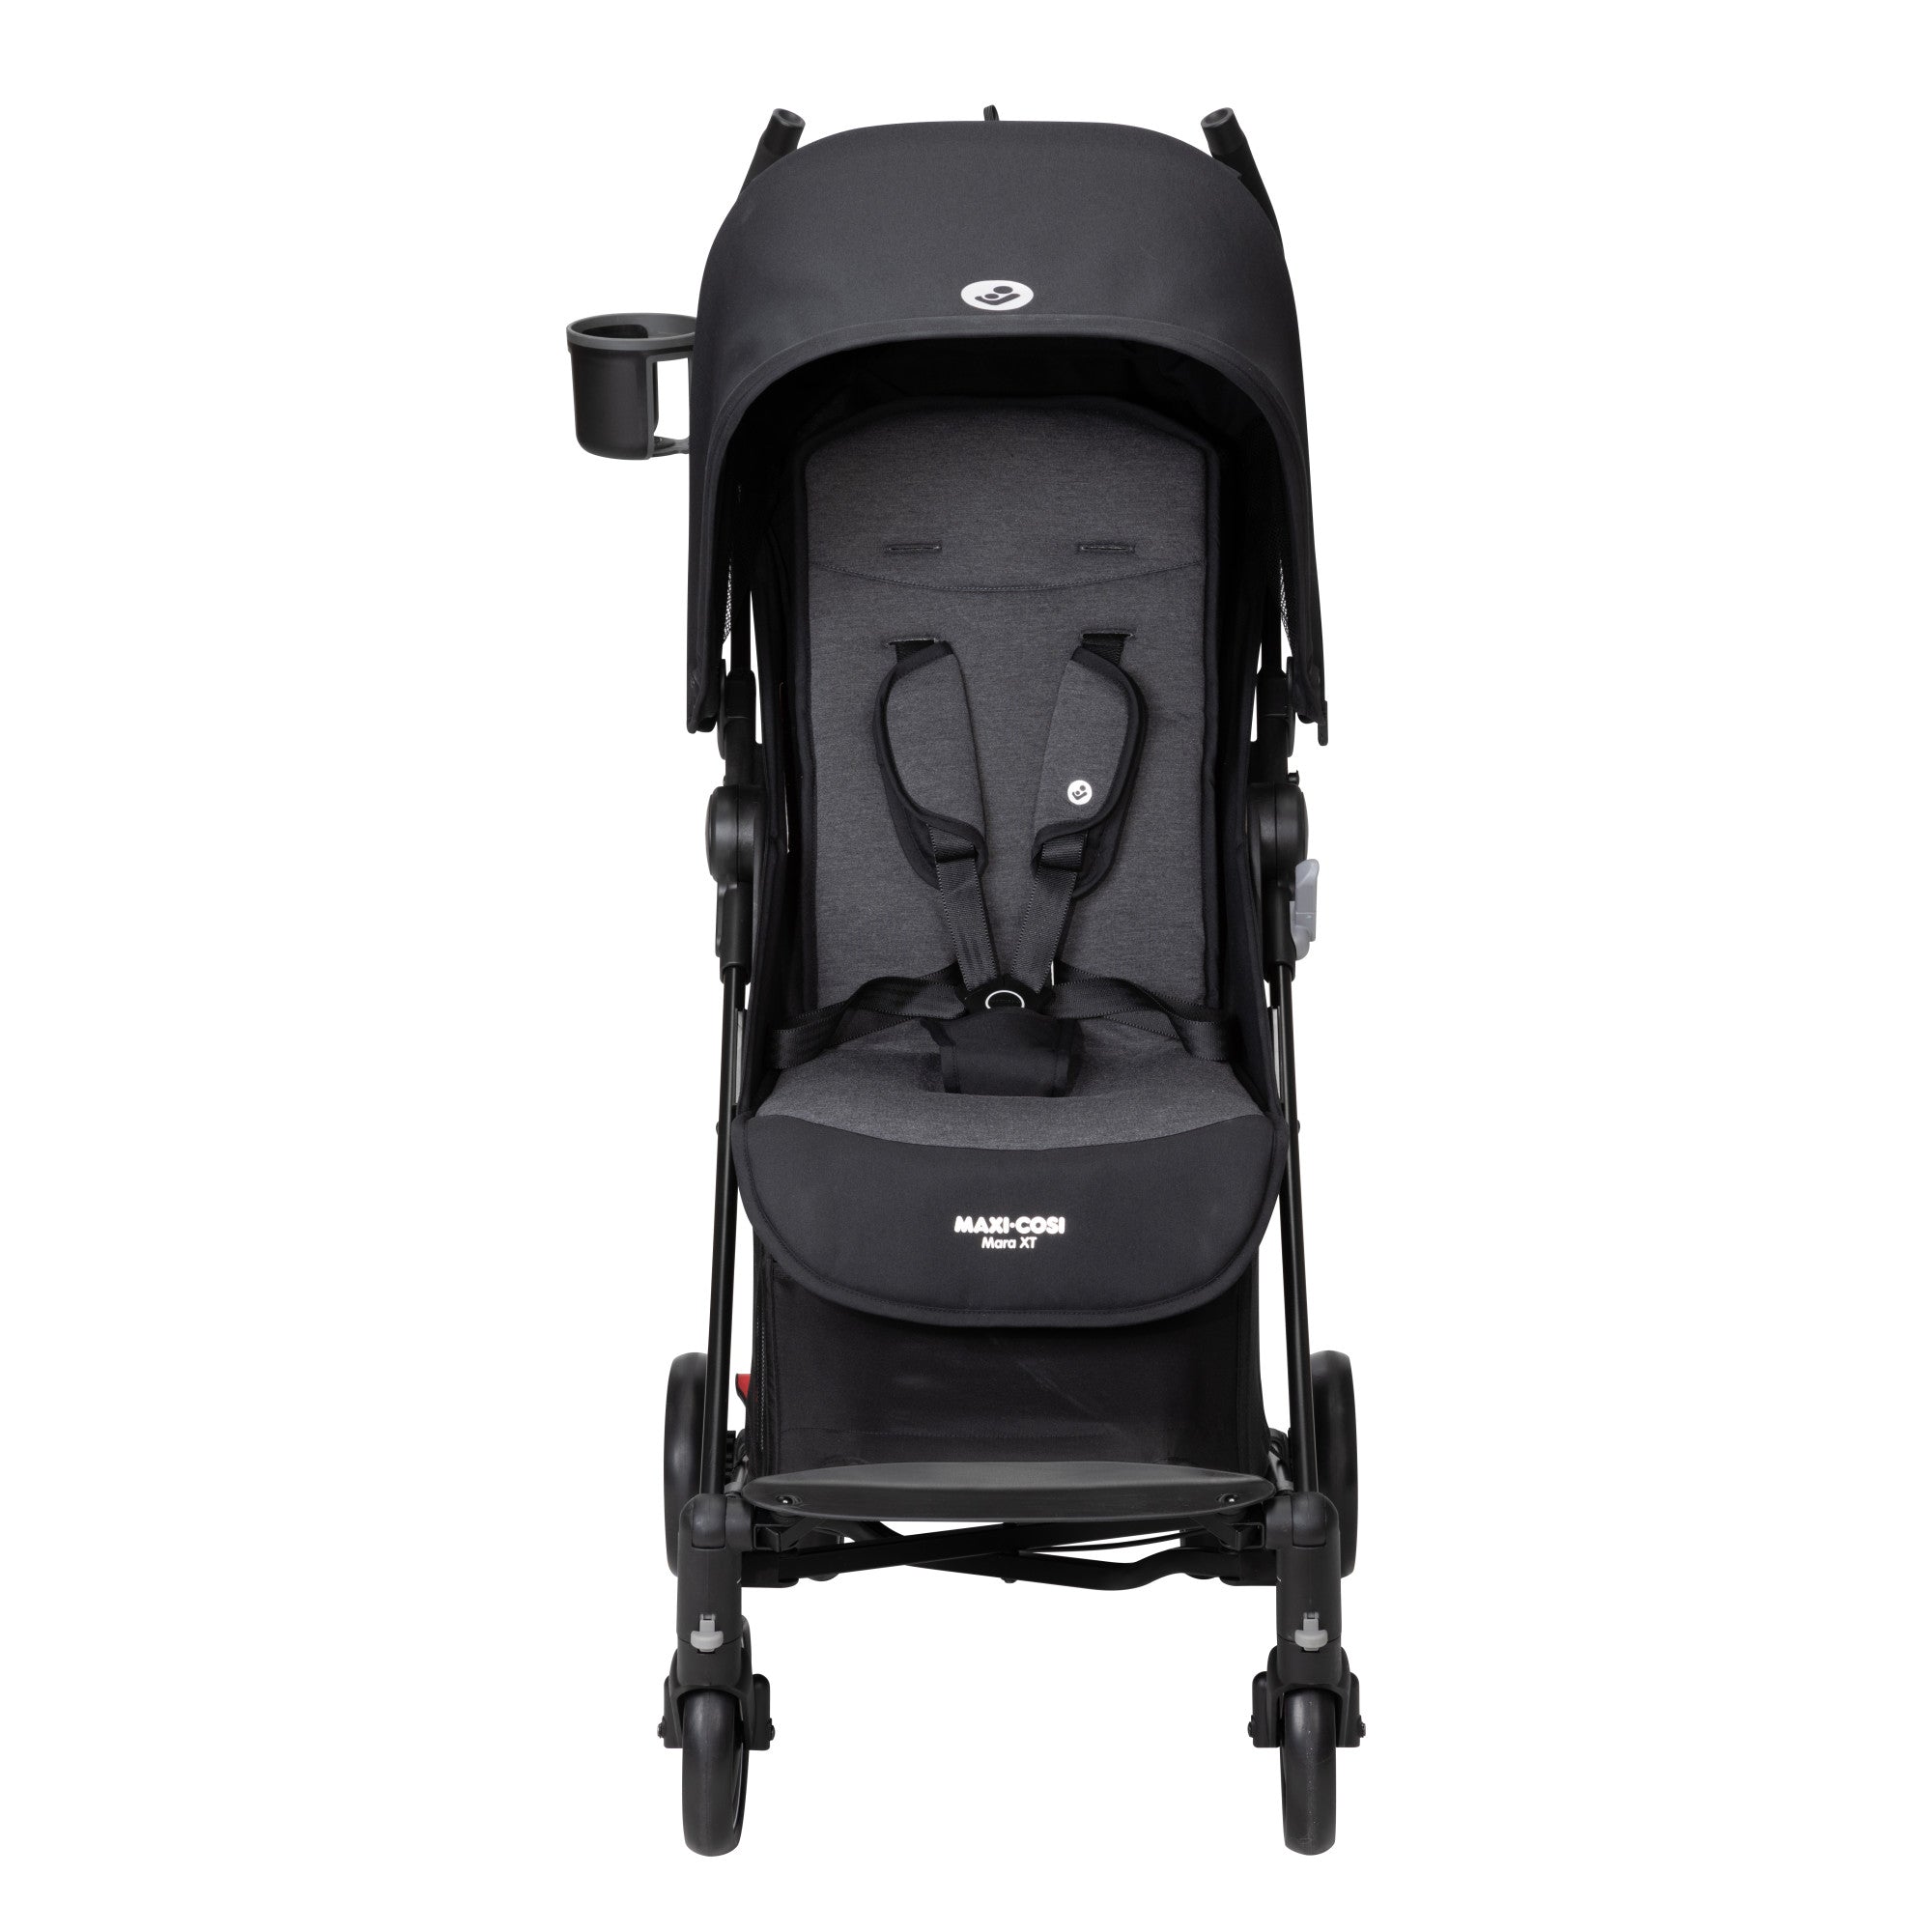 Side view of Maxi-Cosi stroller displaying recline positions